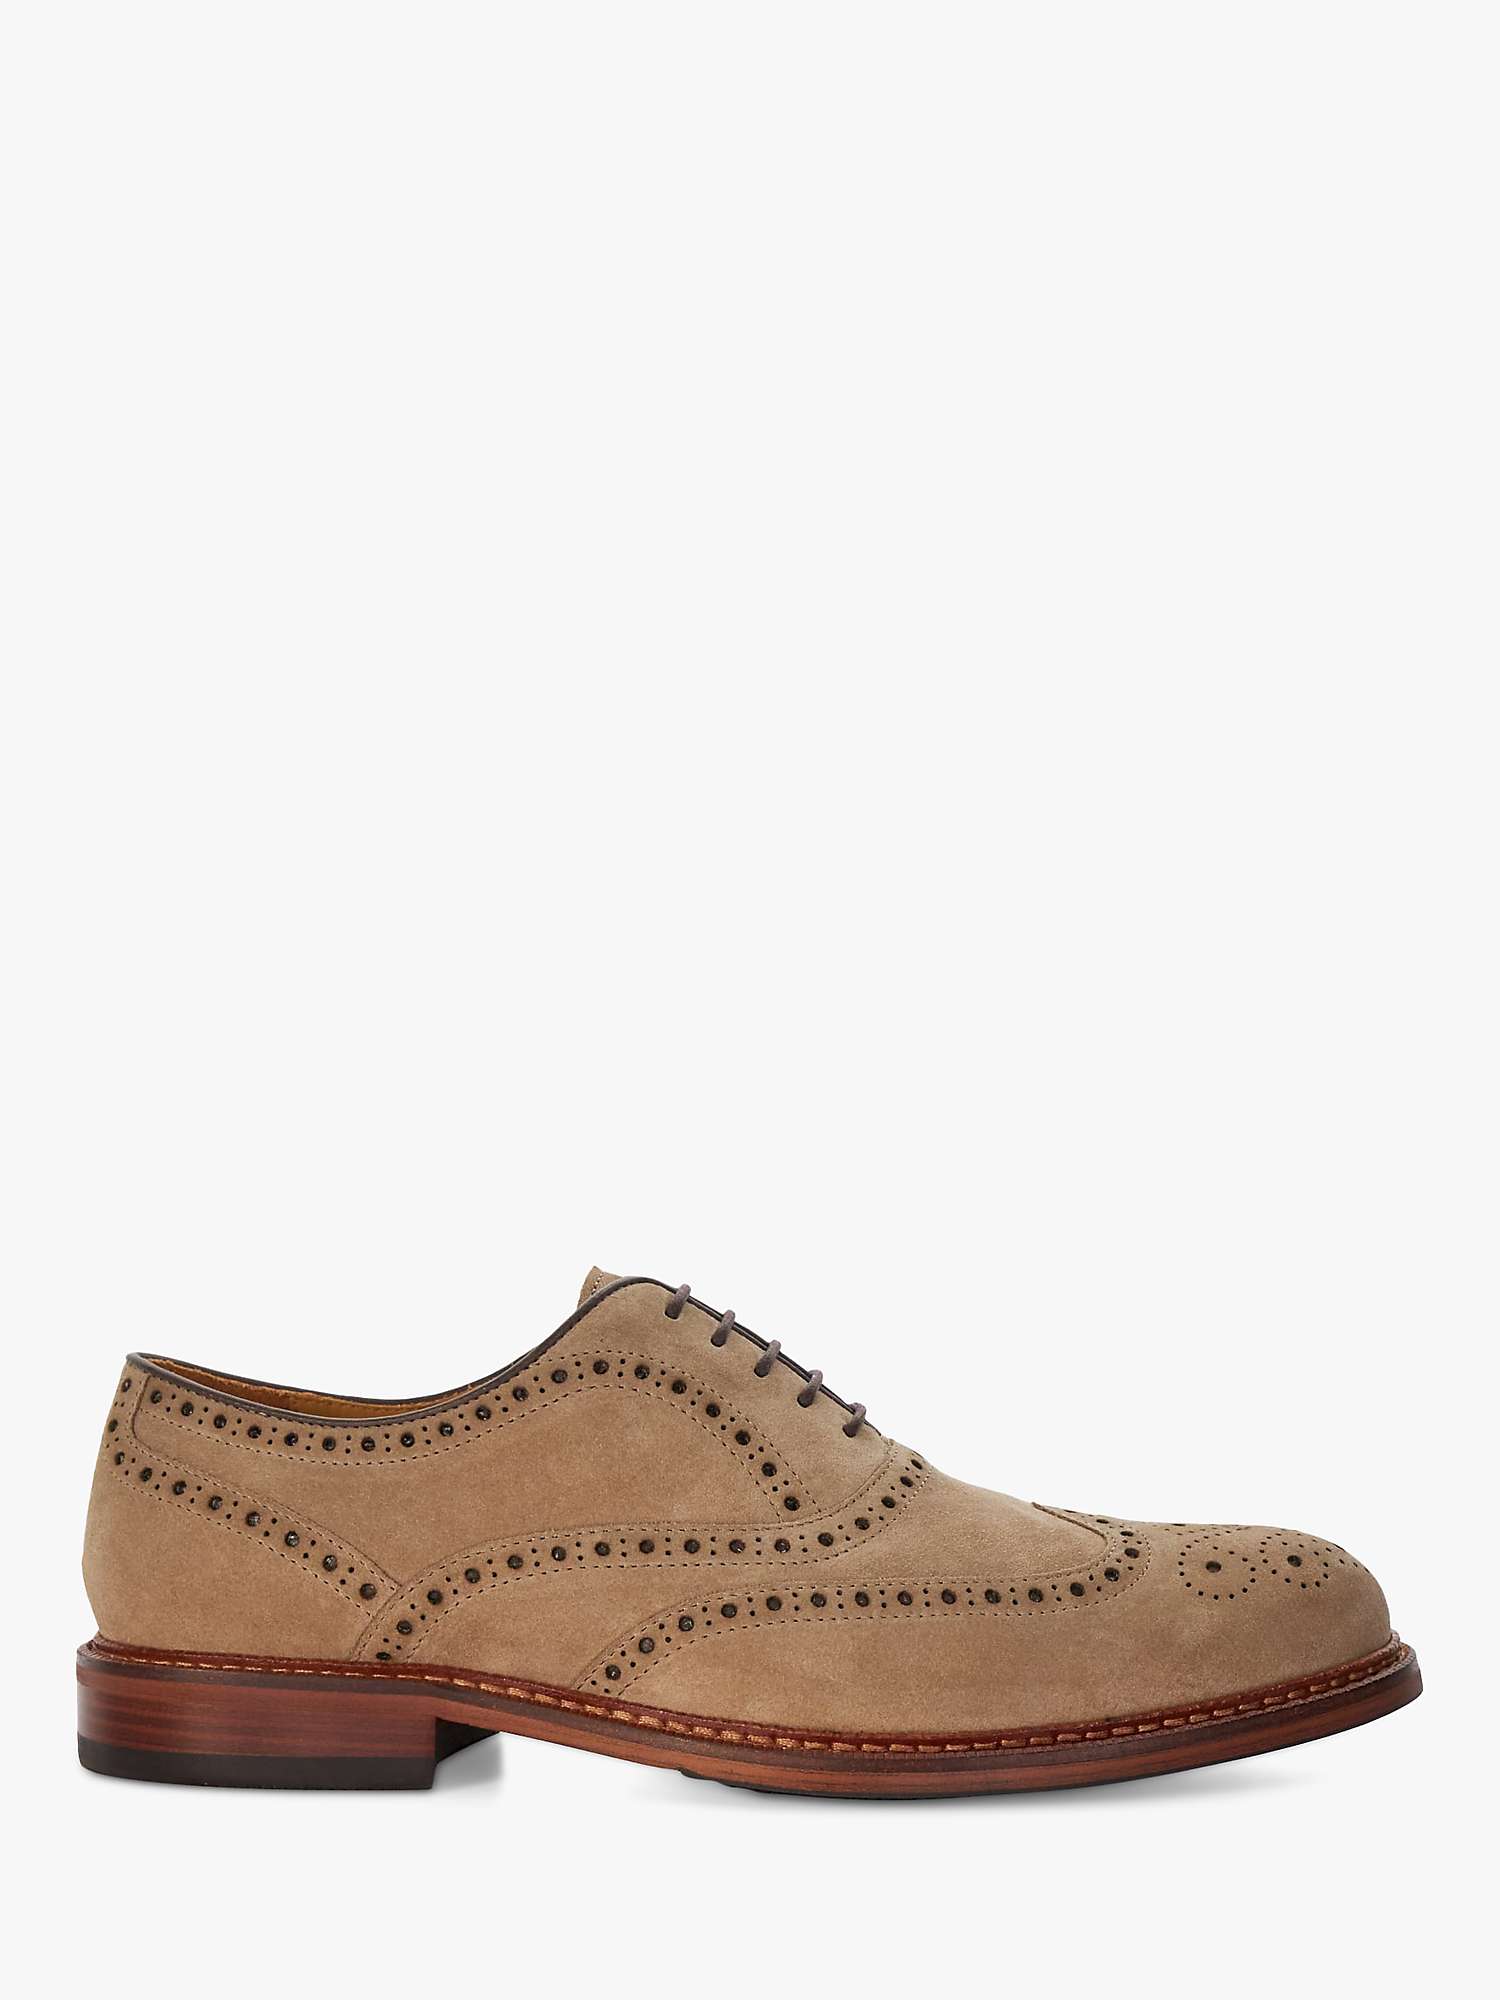 Buy Dune Solihull Suede Oxford Brogue Shoes, Brown Online at johnlewis.com